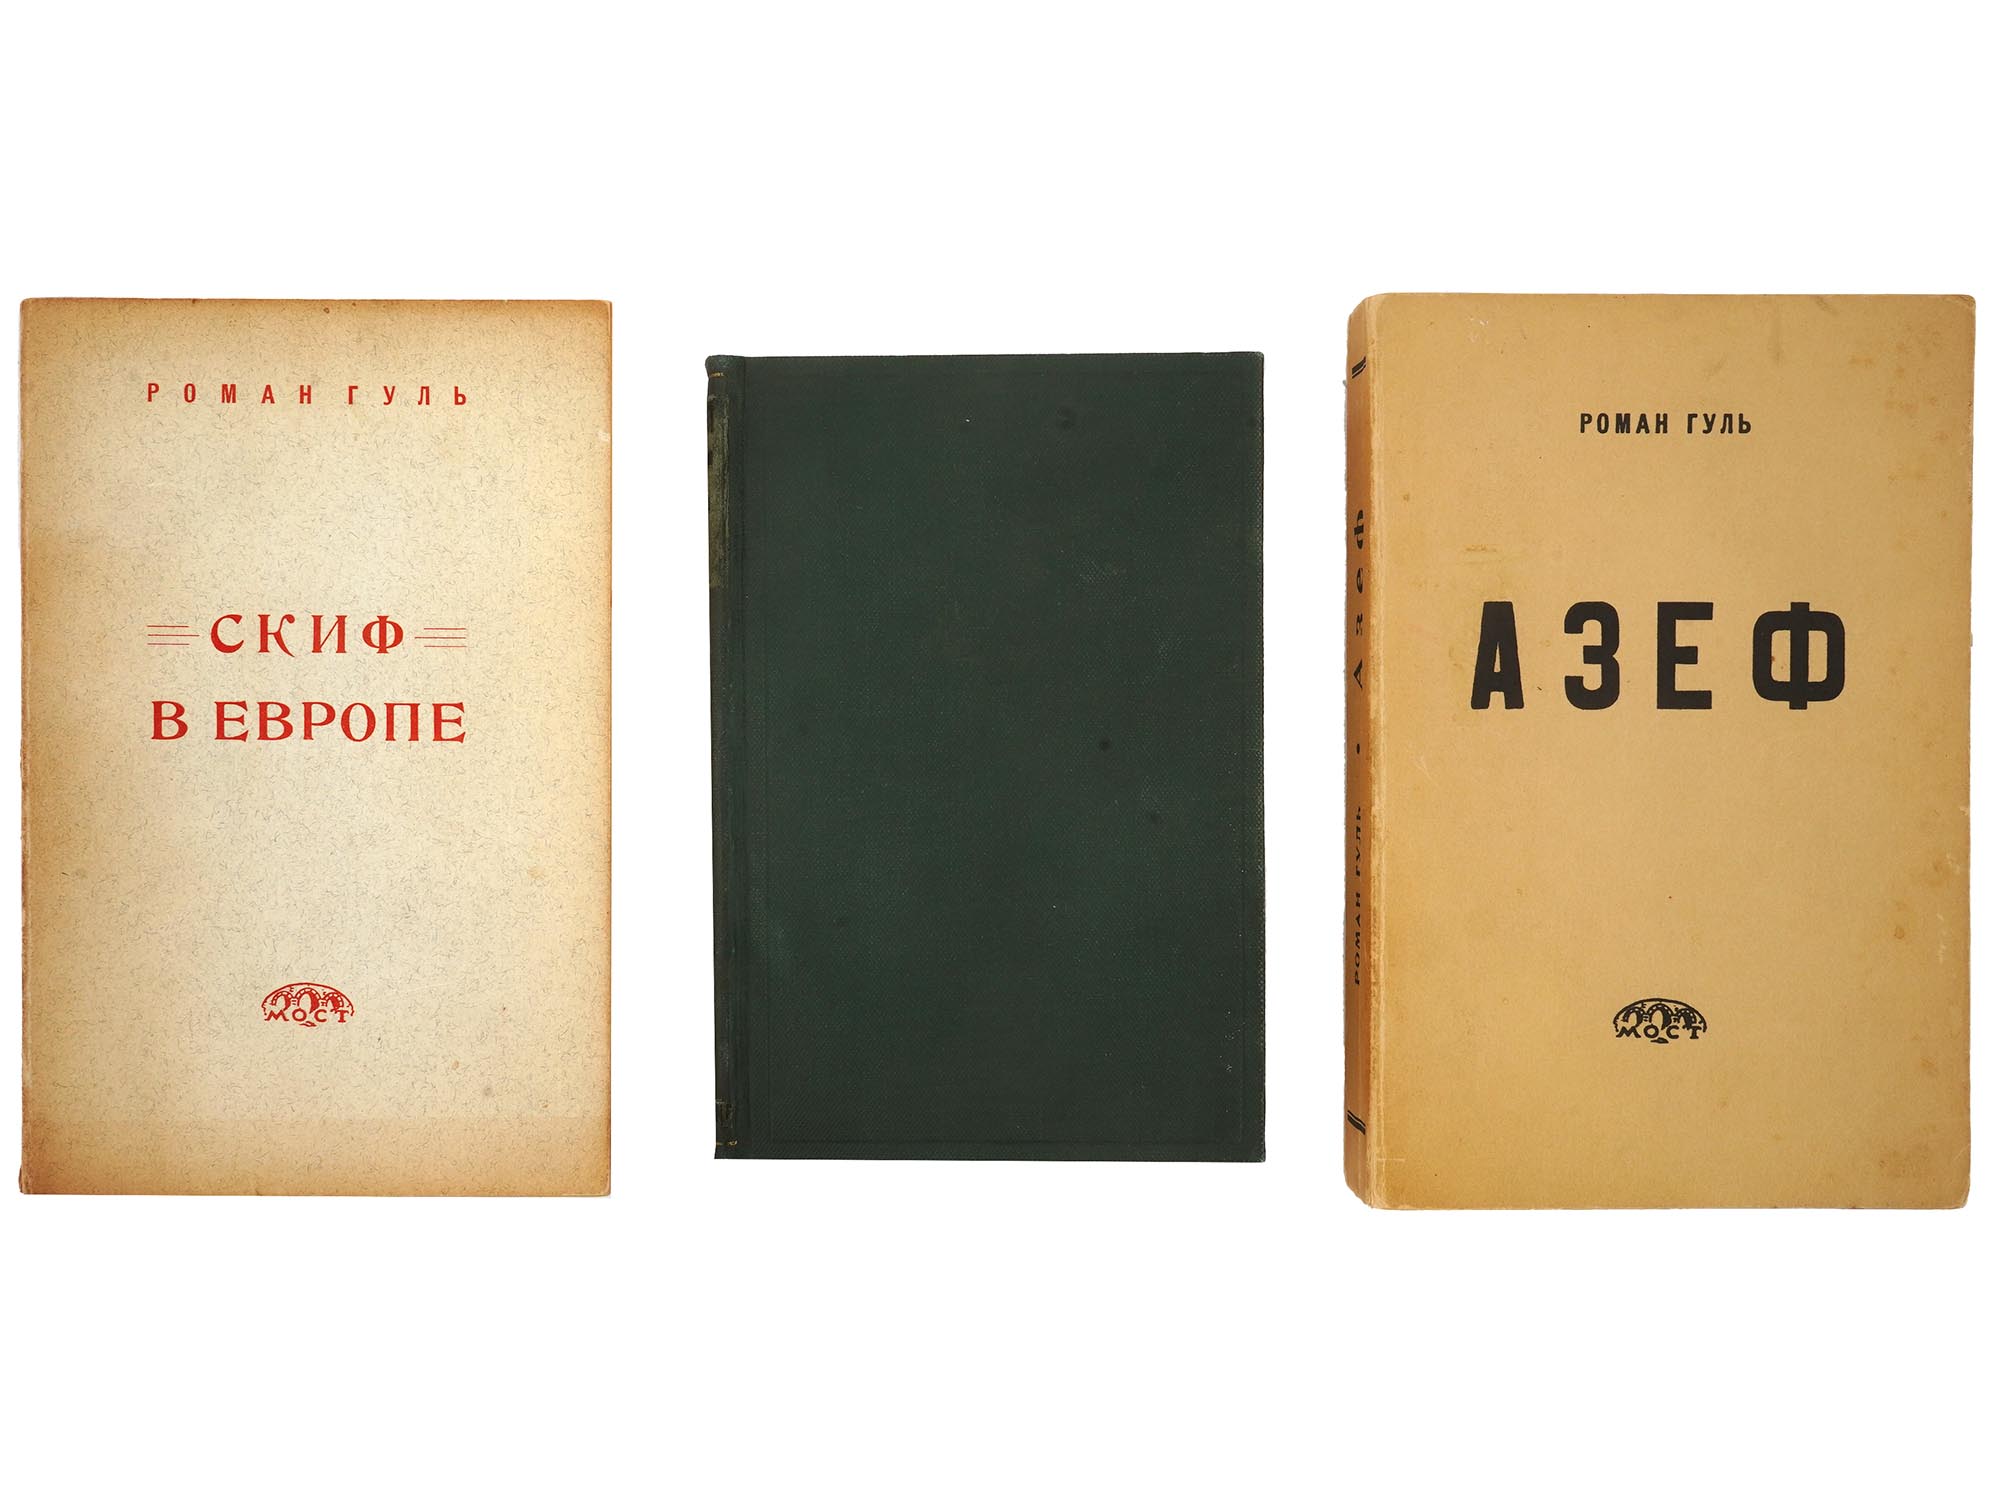 VINTAGE RUSSIAN EMIGRE BOOK EDITIONS GUL ALEXANDROVSKY PIC-0